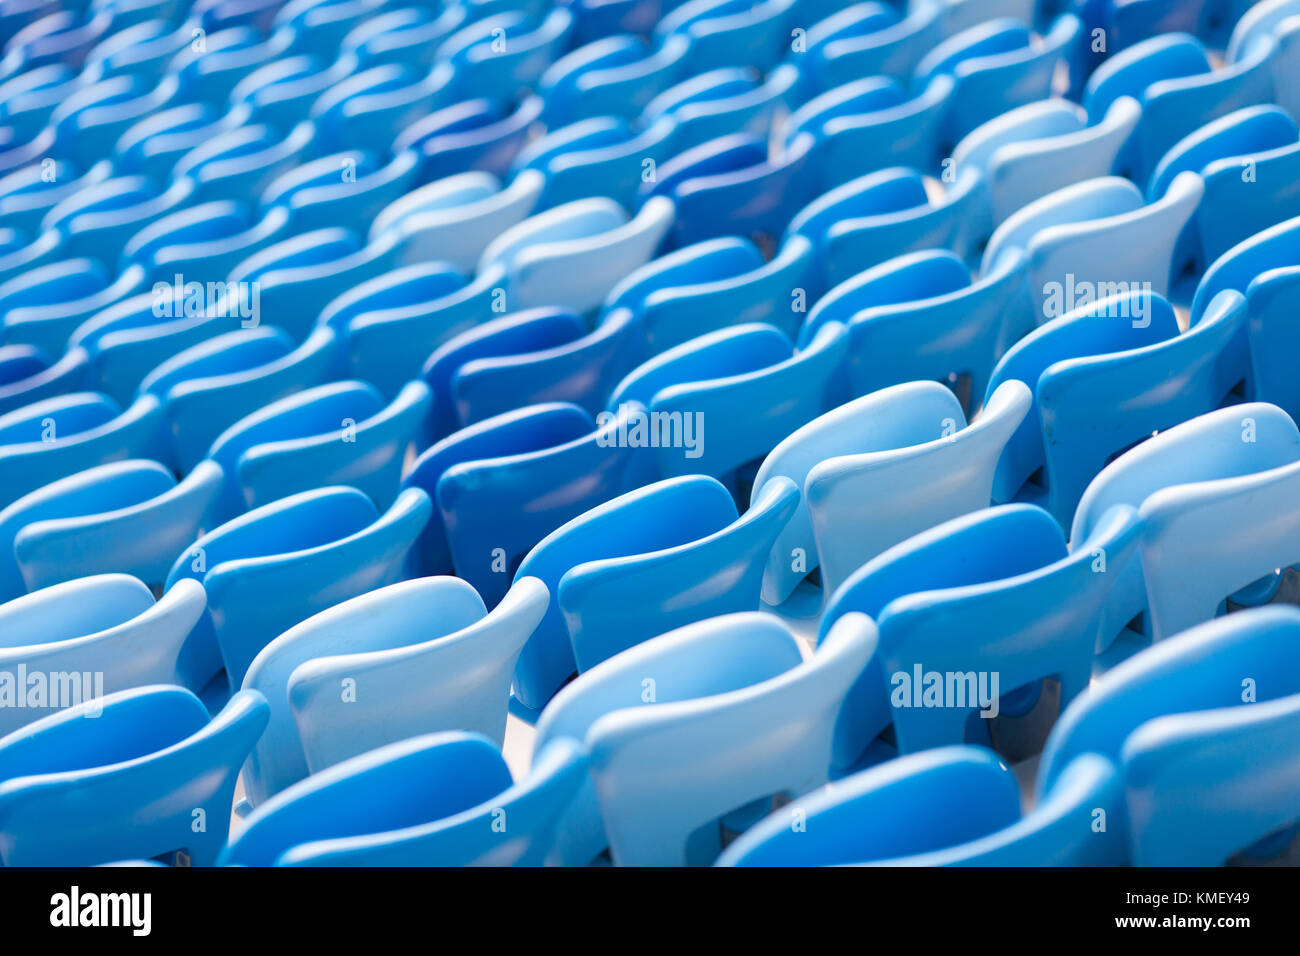 Rows of blue seats at football stadium. Convenient sitting for all. Stock Photo